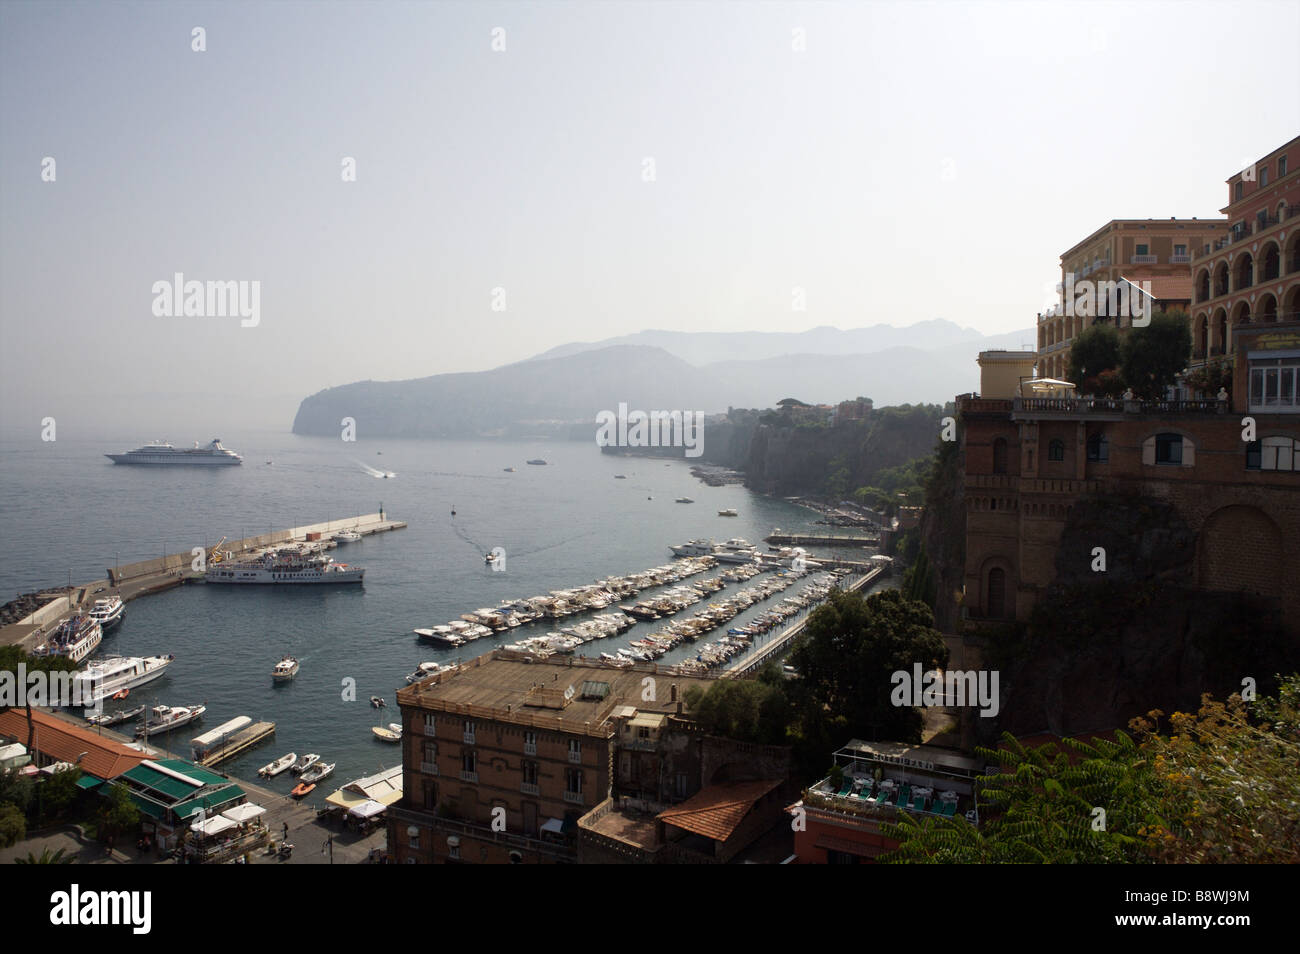 An elevated view of the harbour harbor and port of Sorrento on the Amalfi coast on the Italian Riviera in Italy Stock Photo